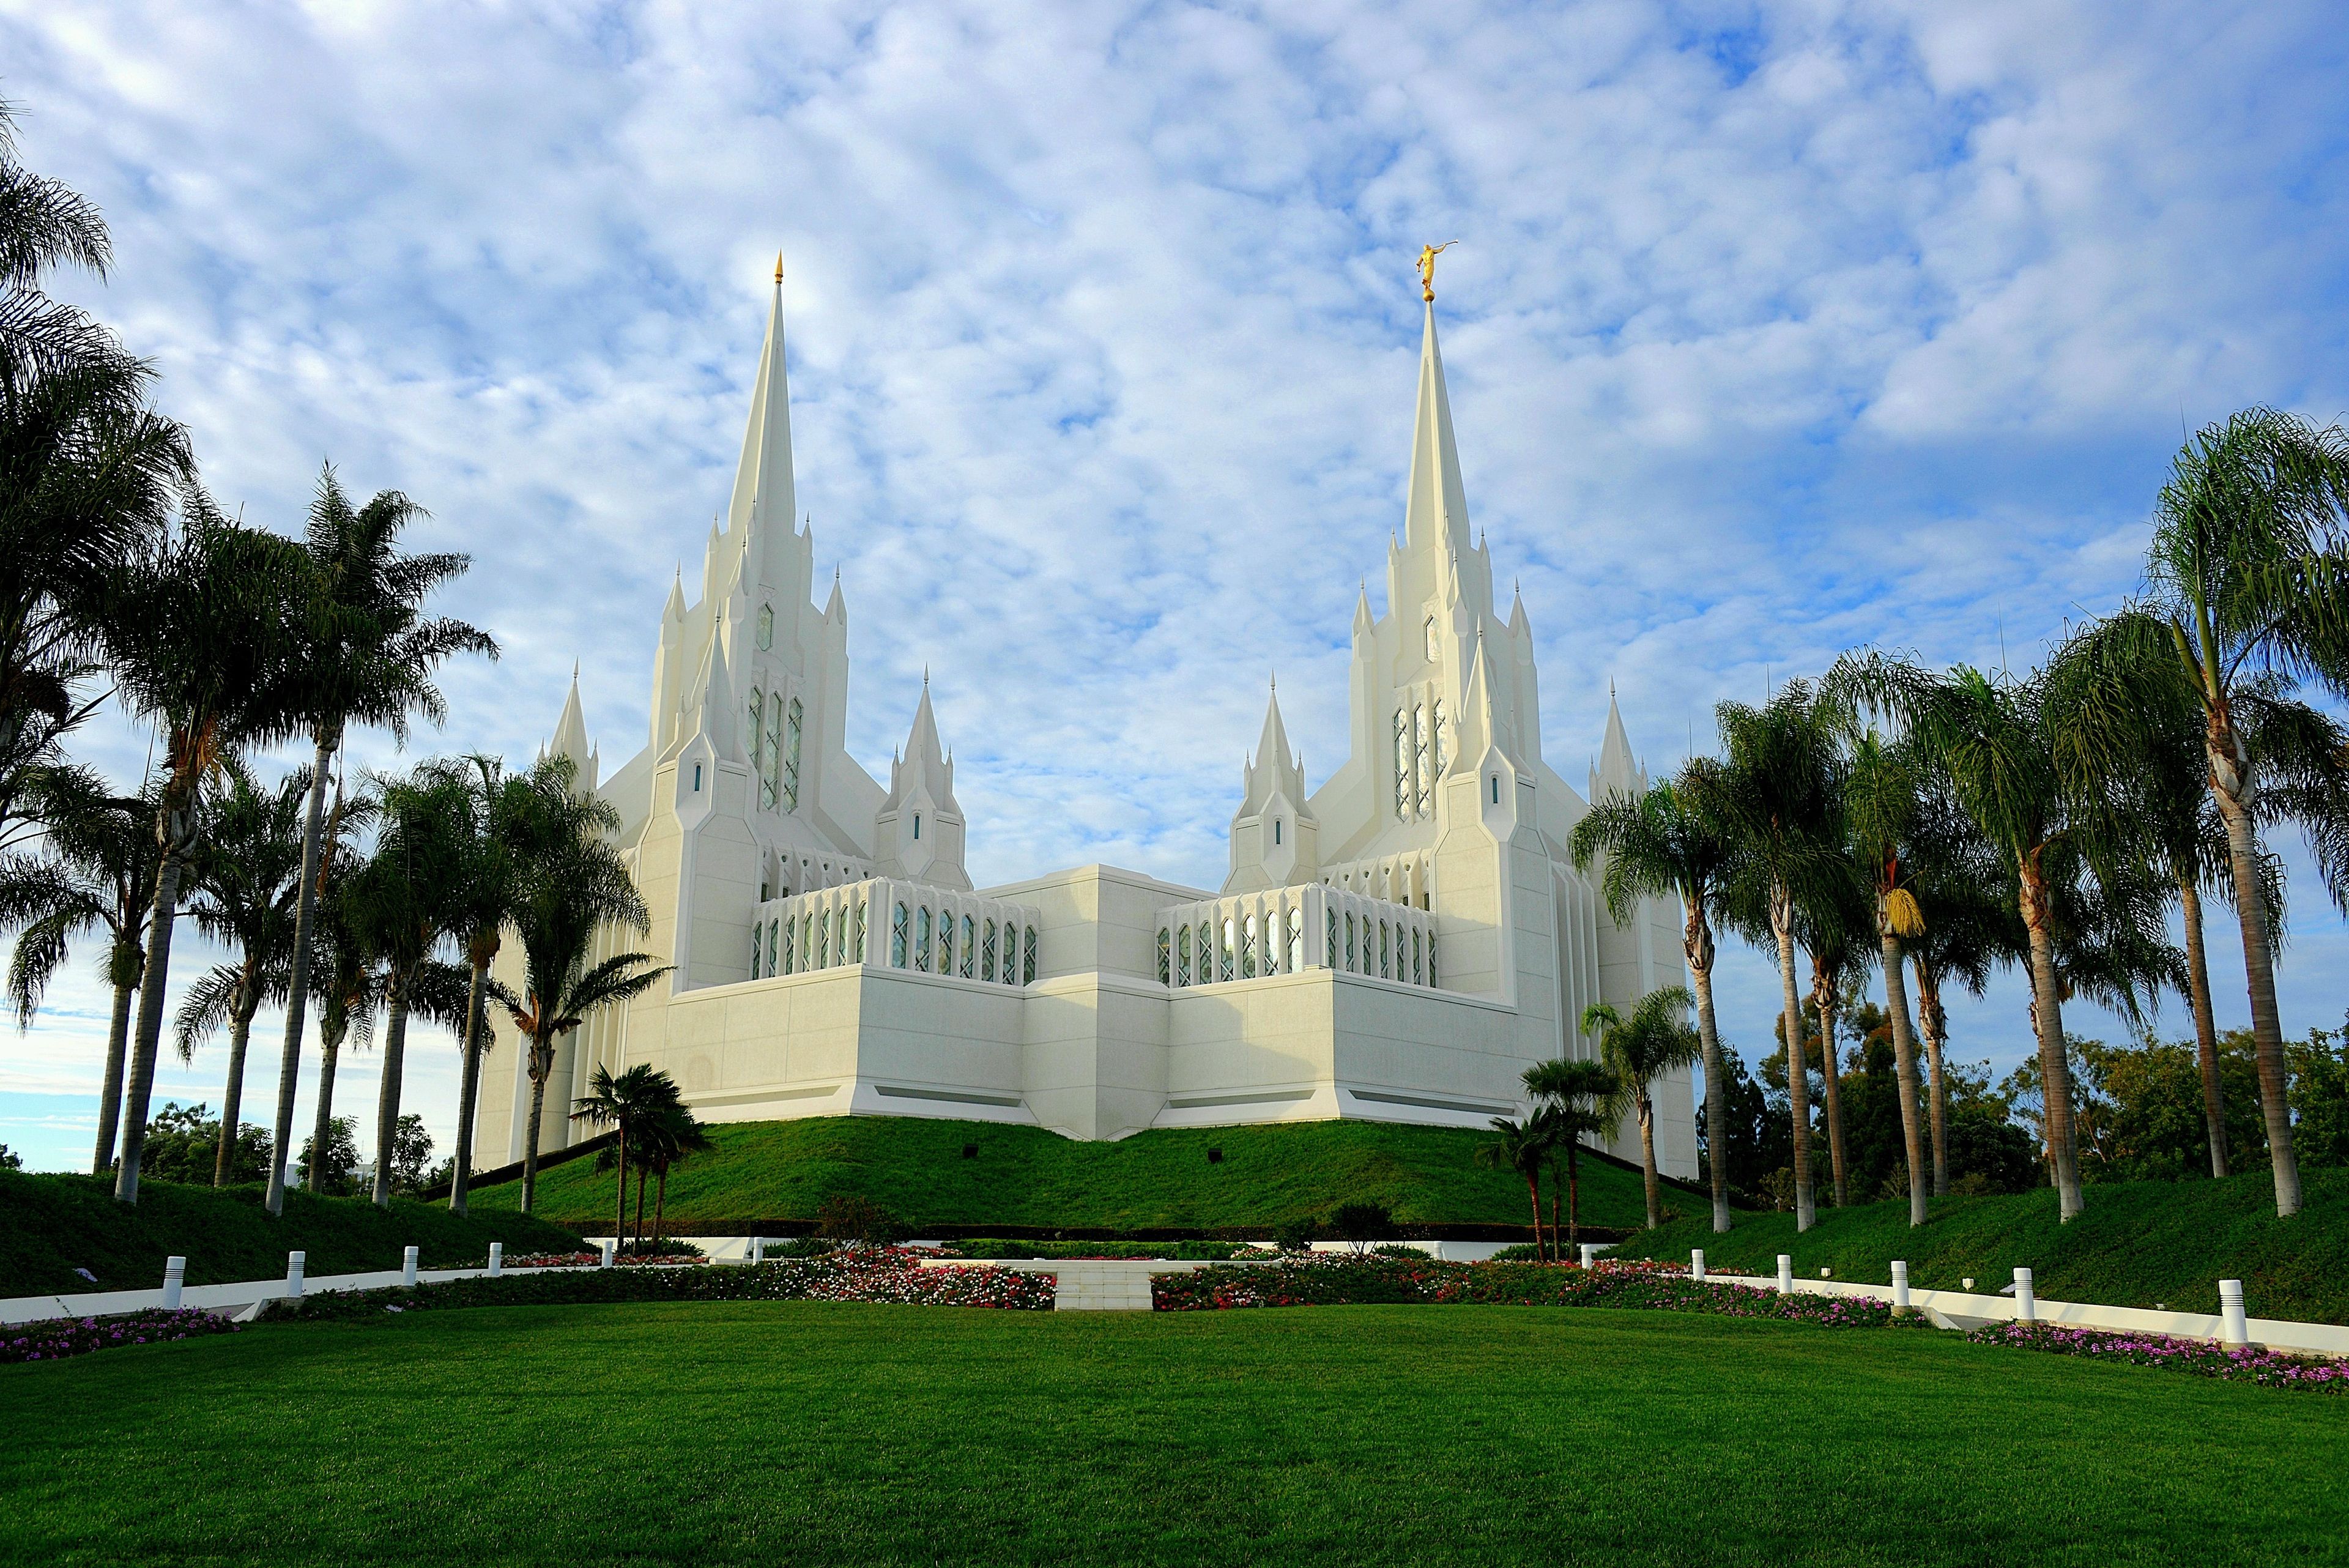 The San Diego California Temple and its lawns on a partly cloudy day.